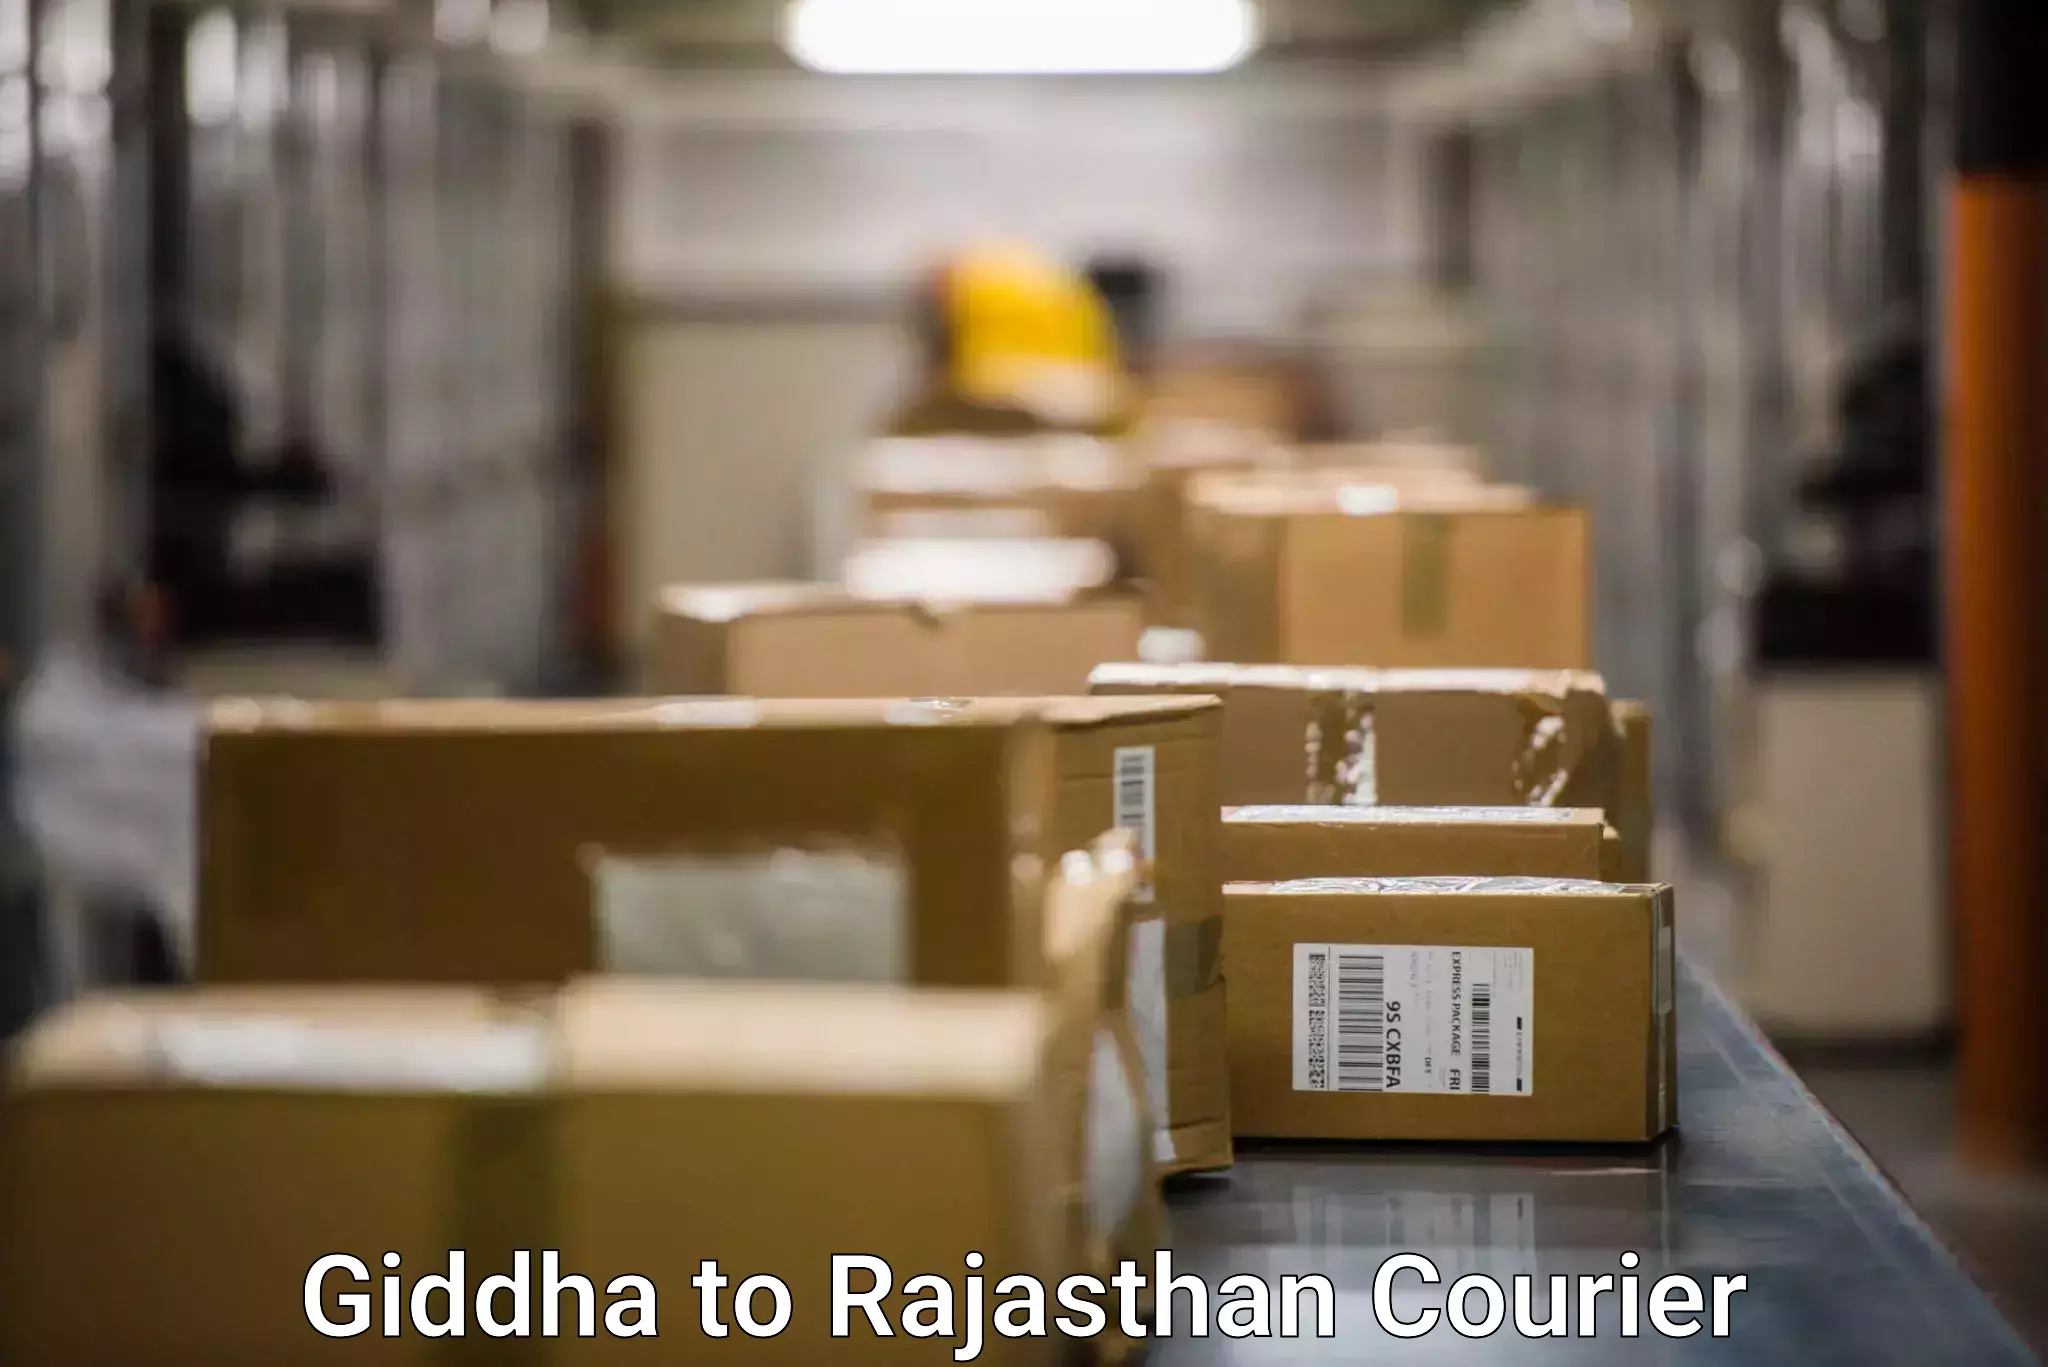 Delivery service partnership Giddha to Yeswanthapur